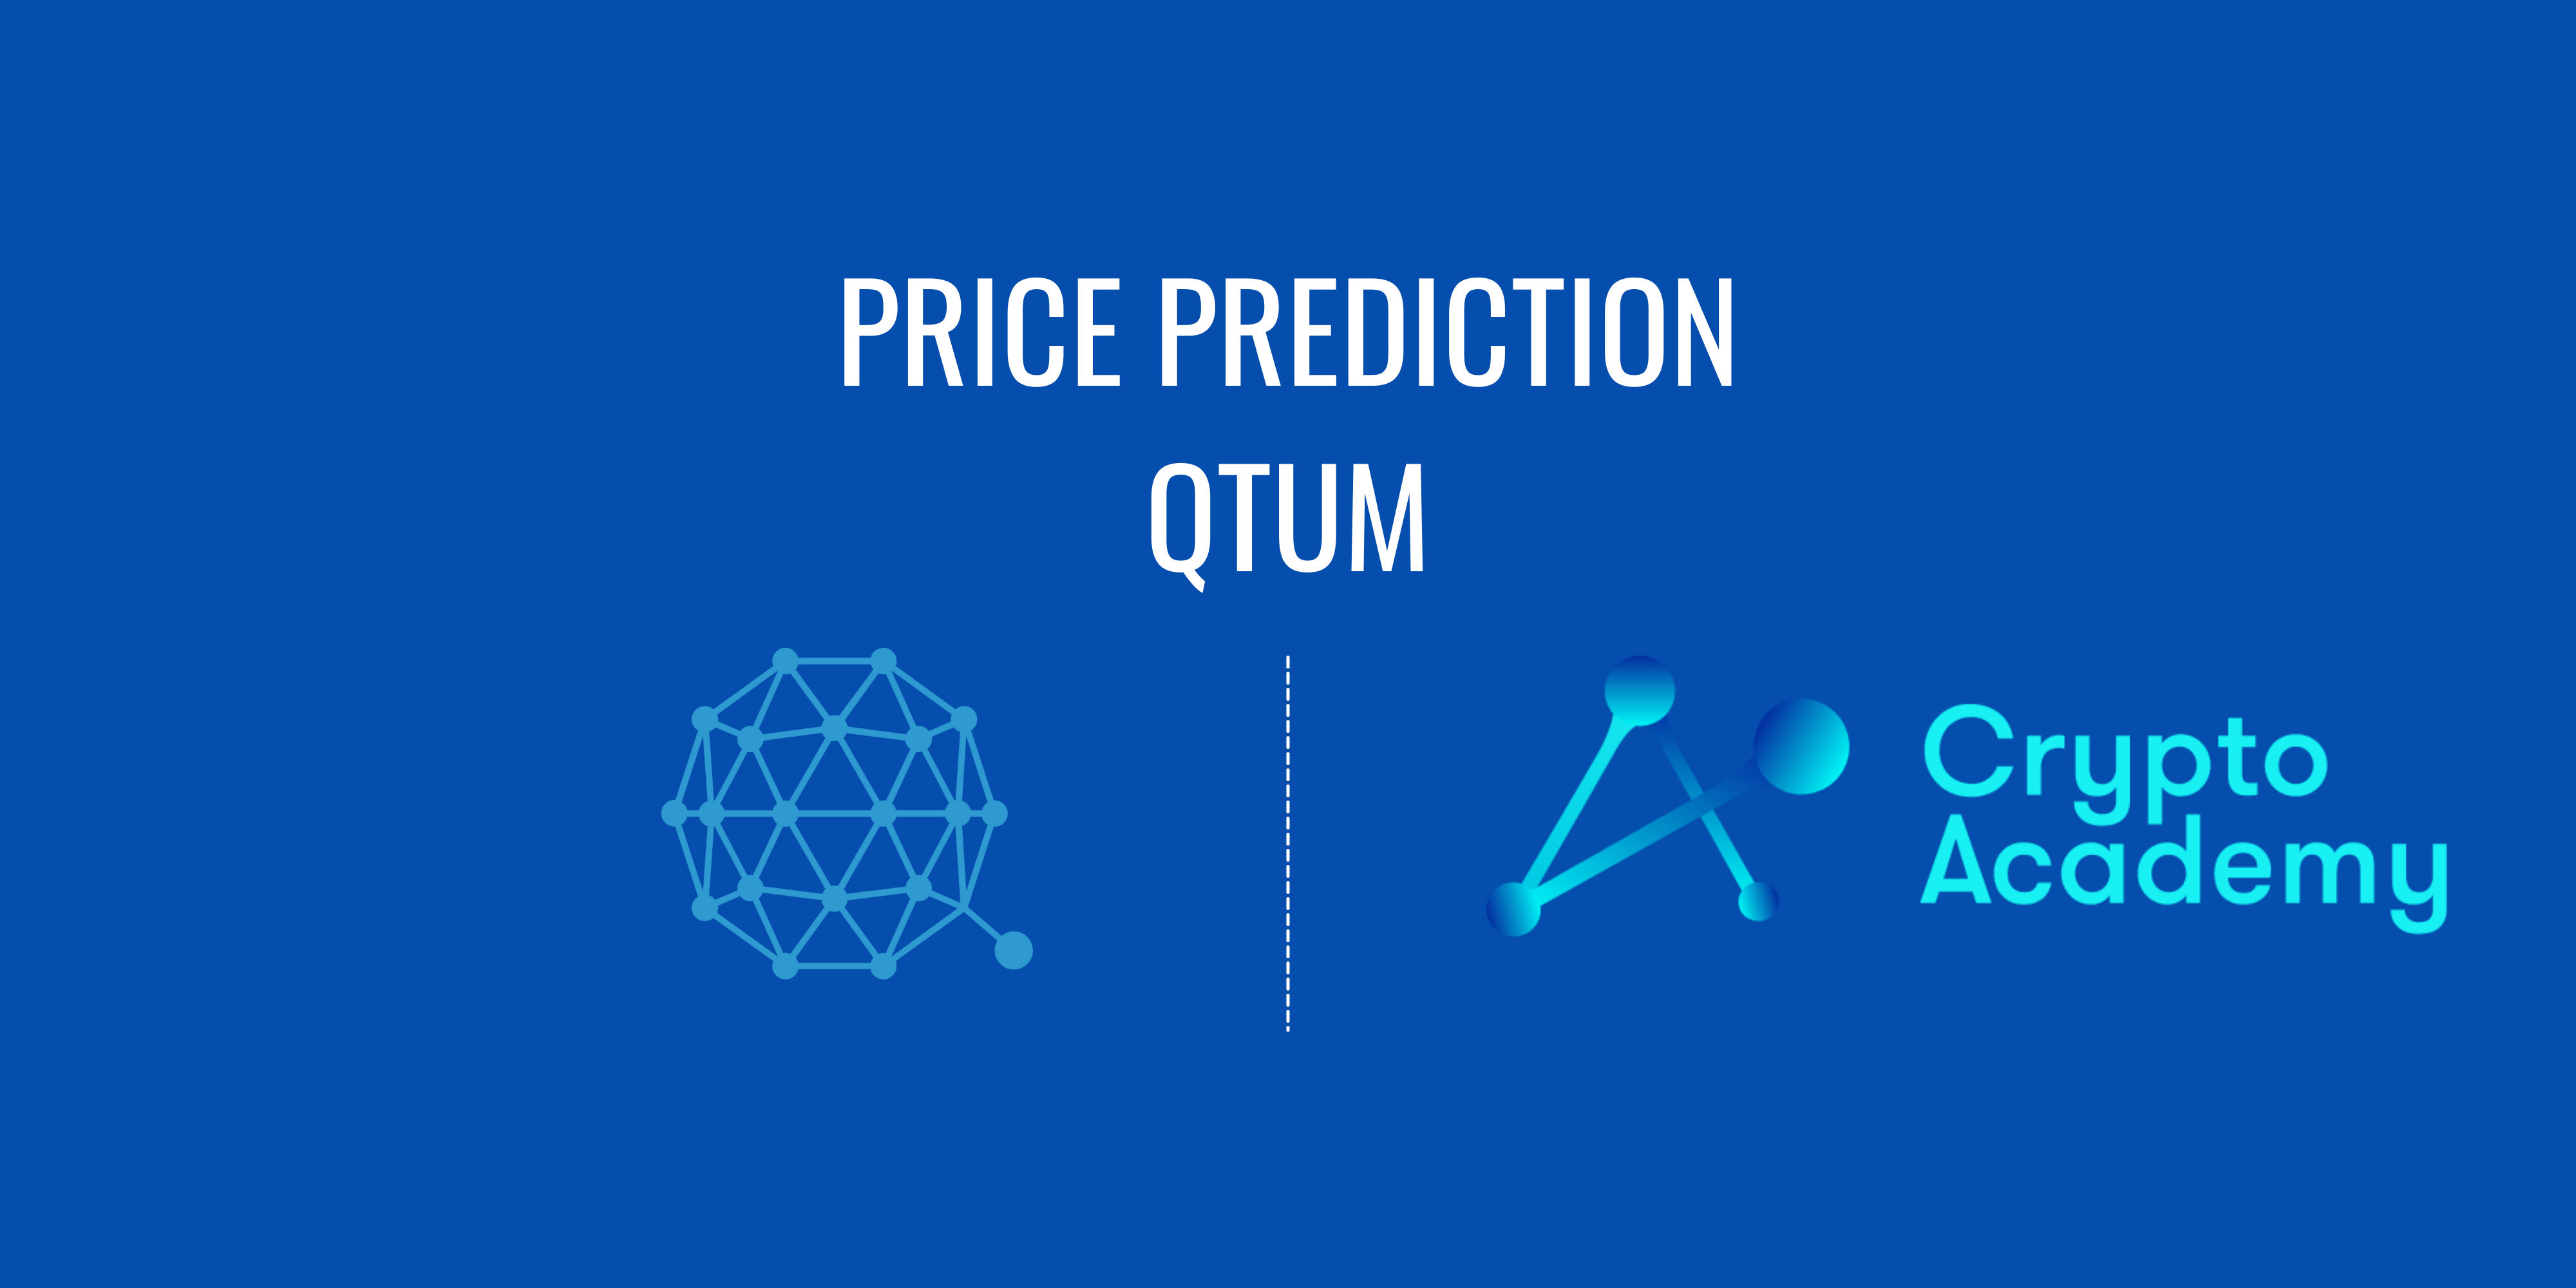 Qtum Price Prediction 2021 and Beyond – Is QTUM a Good Investment?